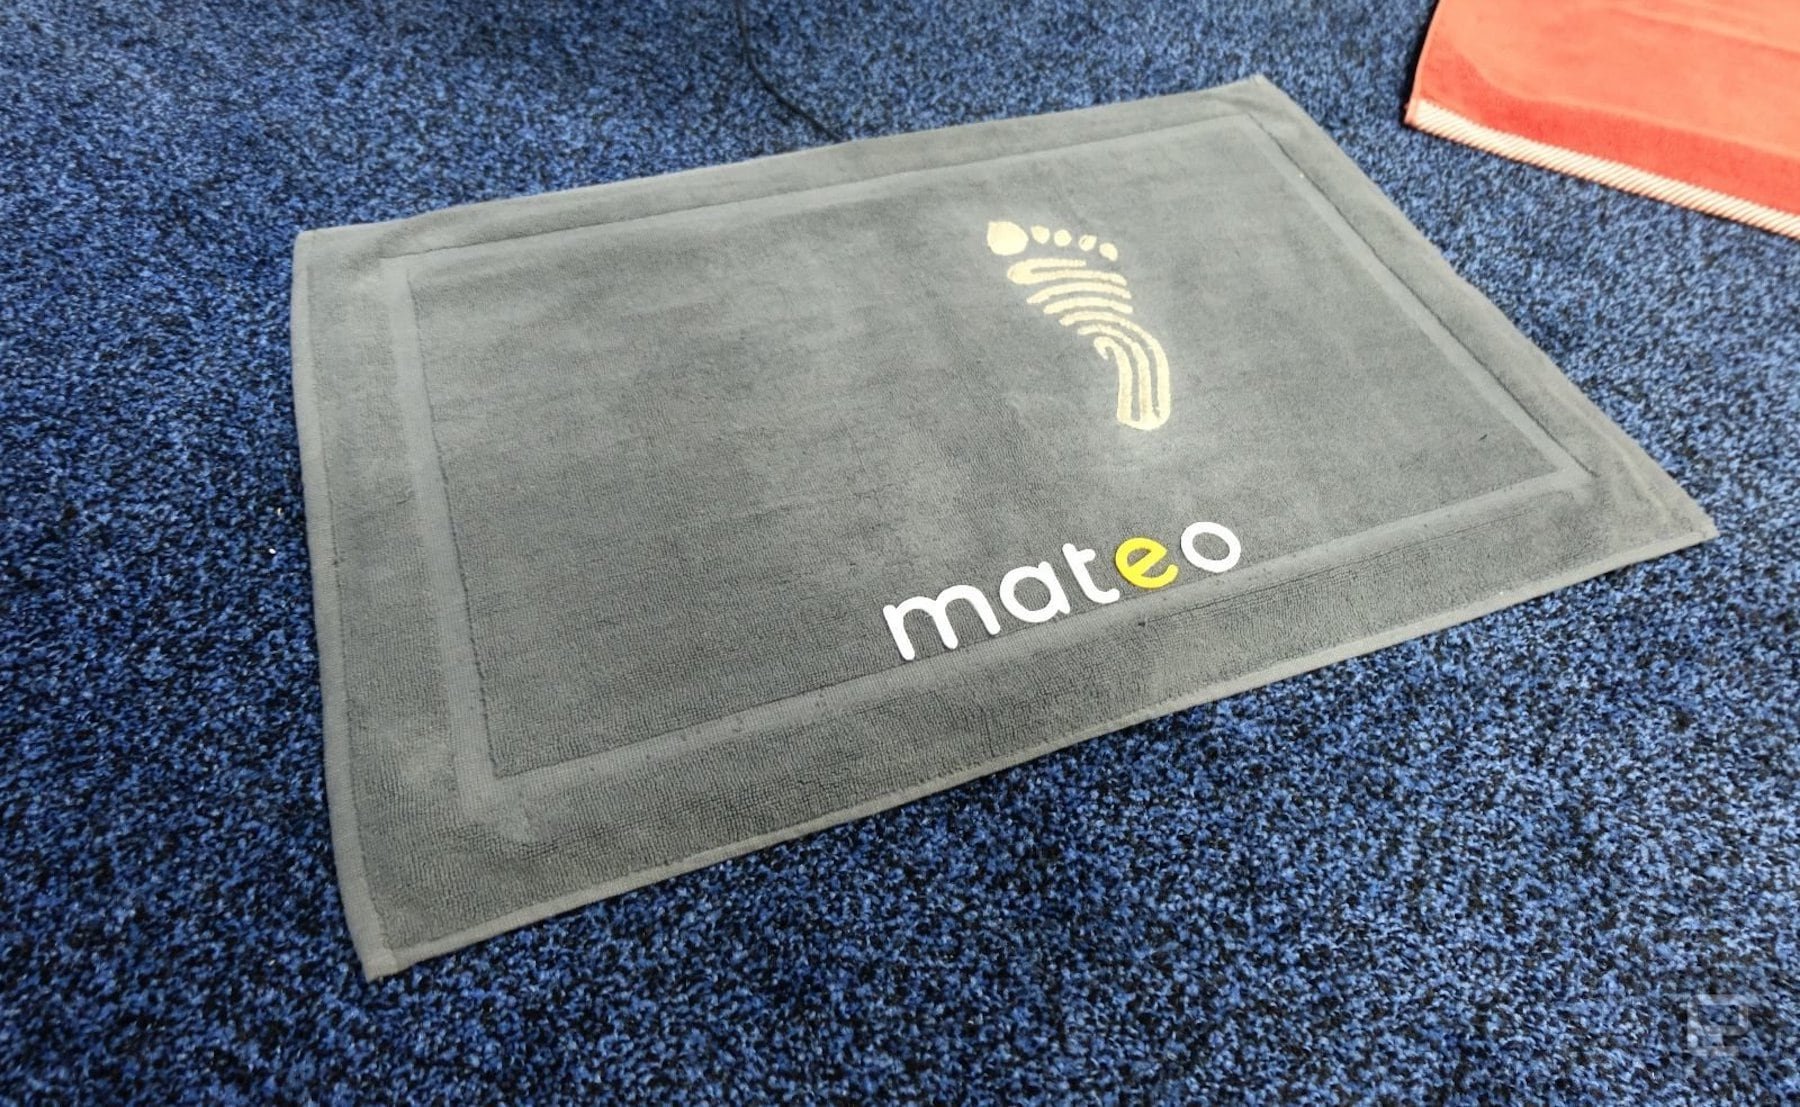 Mateo Smart Bathroom Mat removes the scale from your life